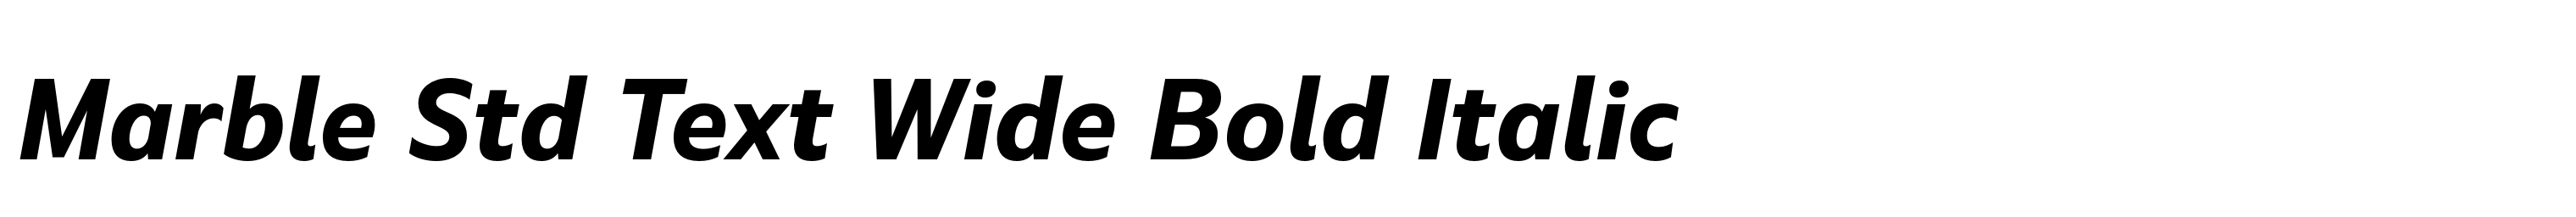 Marble Std Text Wide Bold Italic